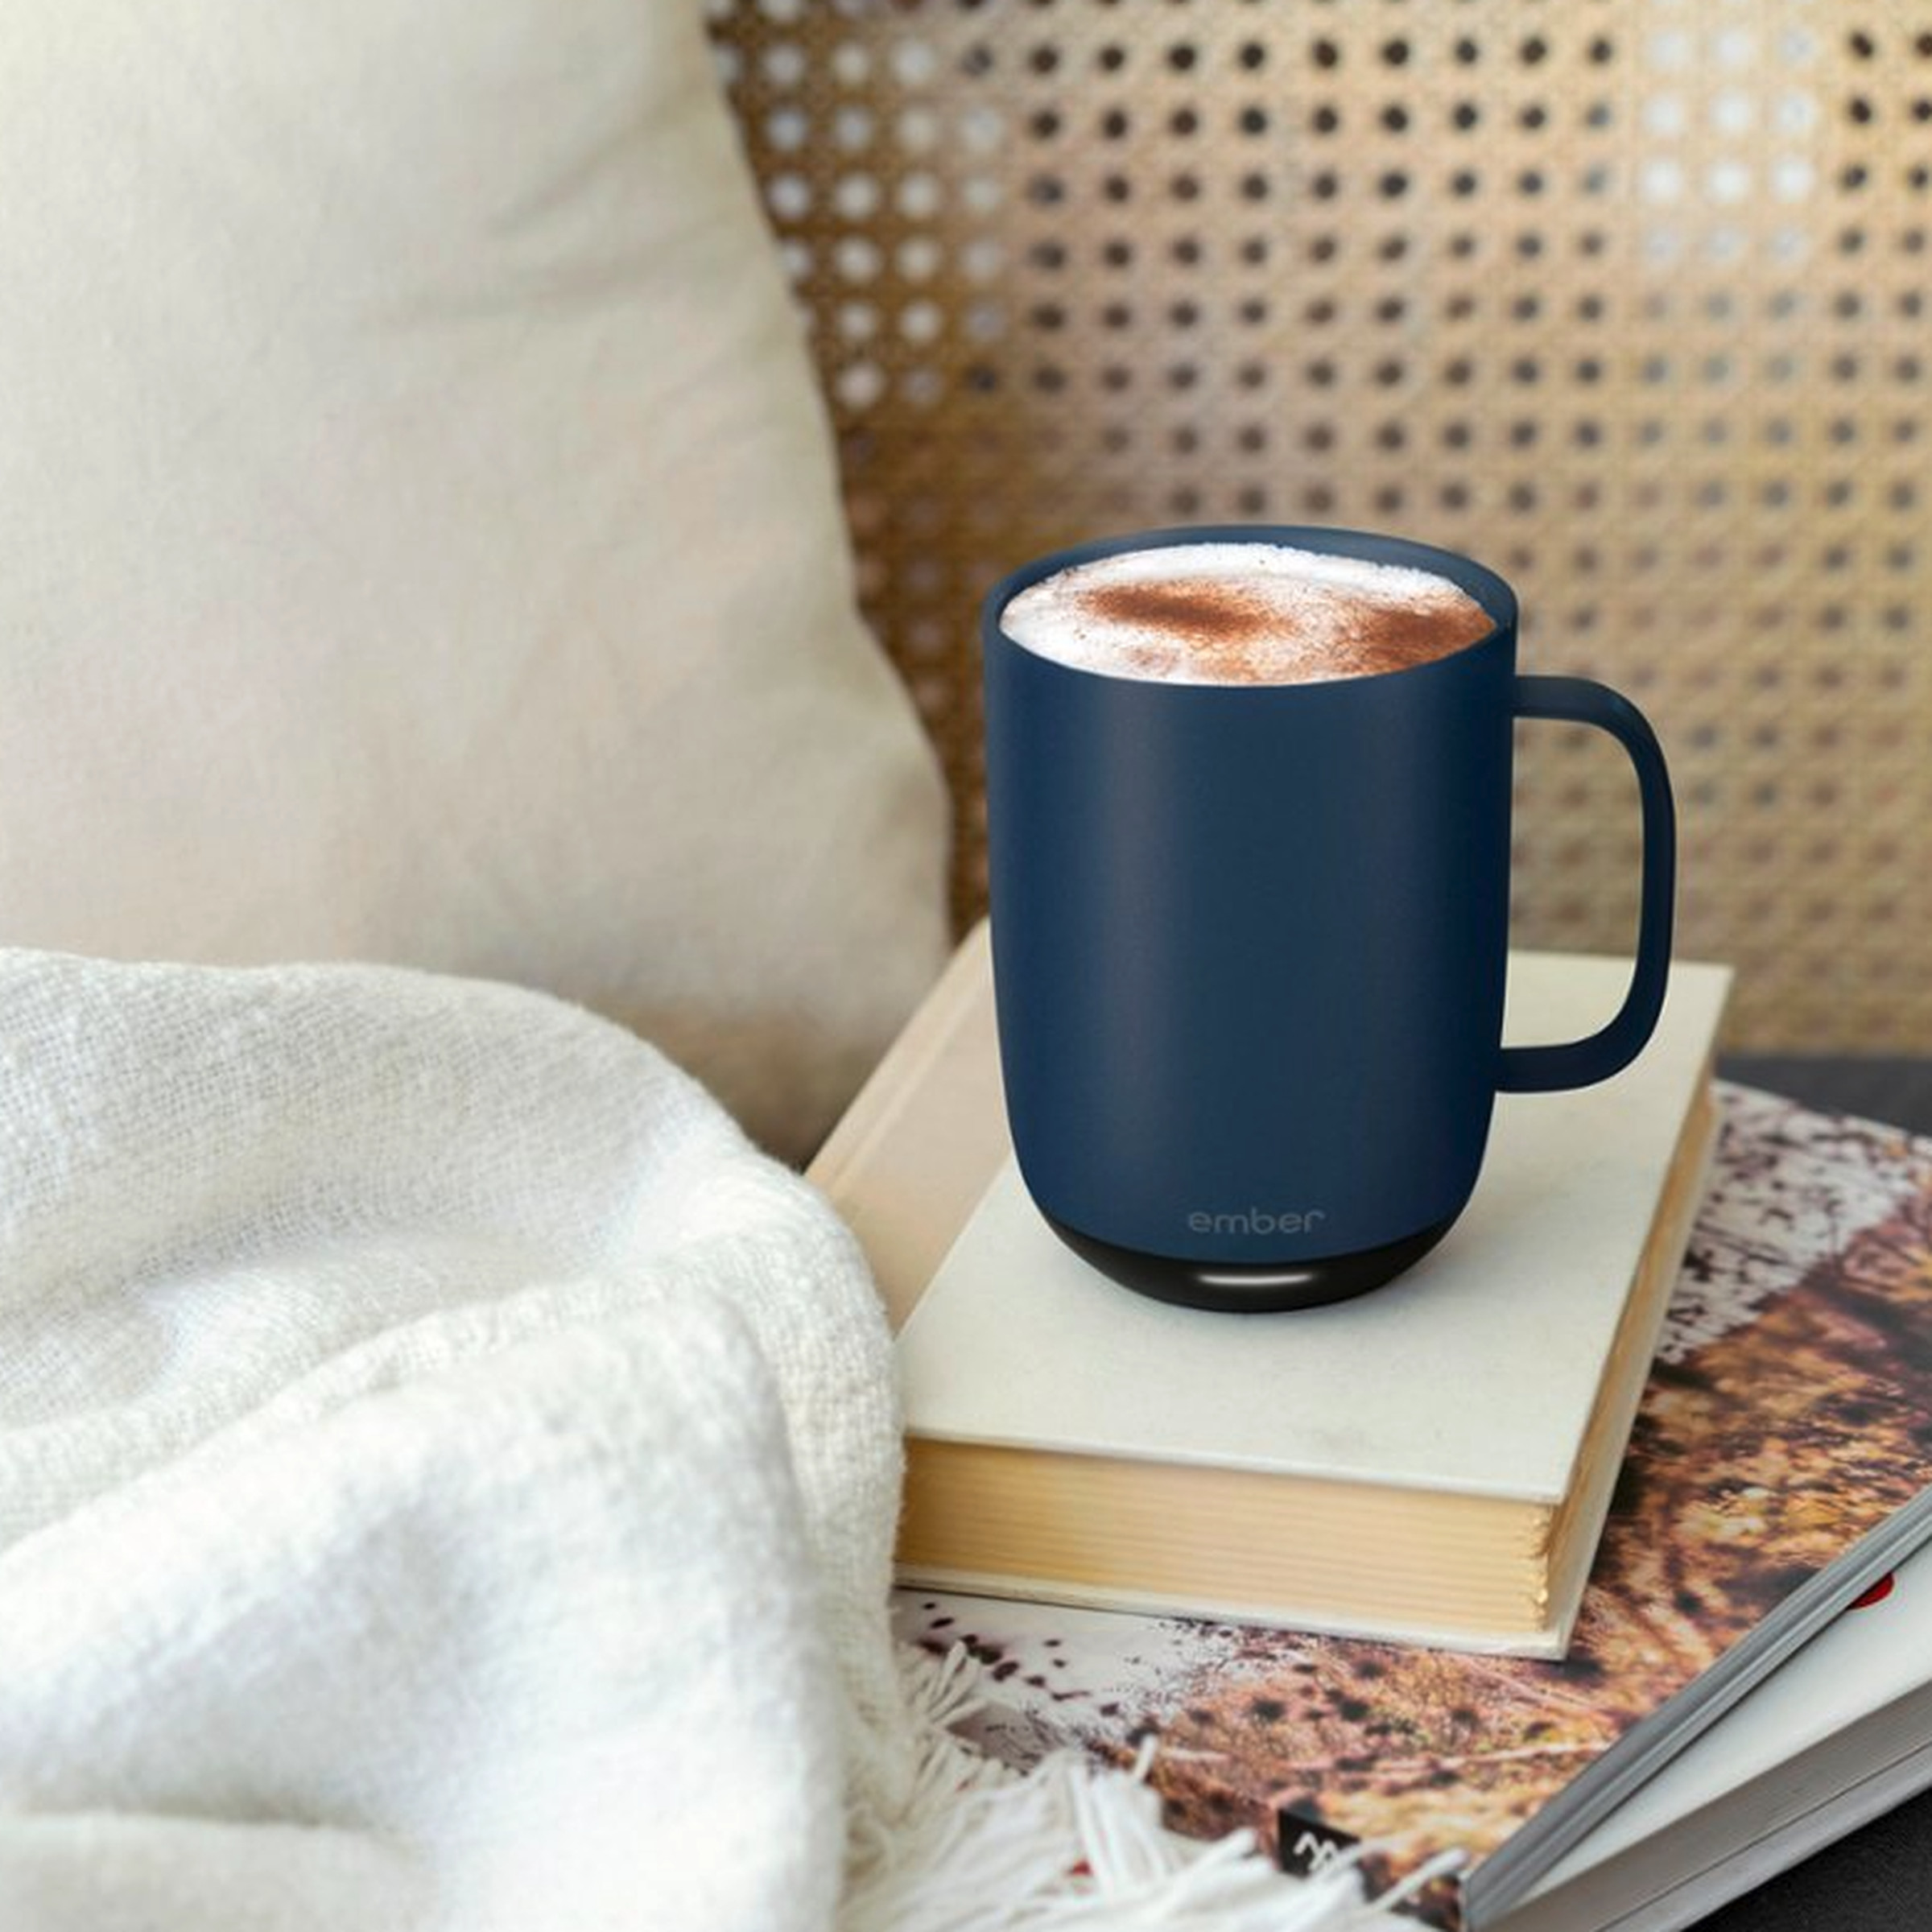 You can set your coffee to the exact temperature you like via the Ember Mug 2’s accompanying smartphone app.